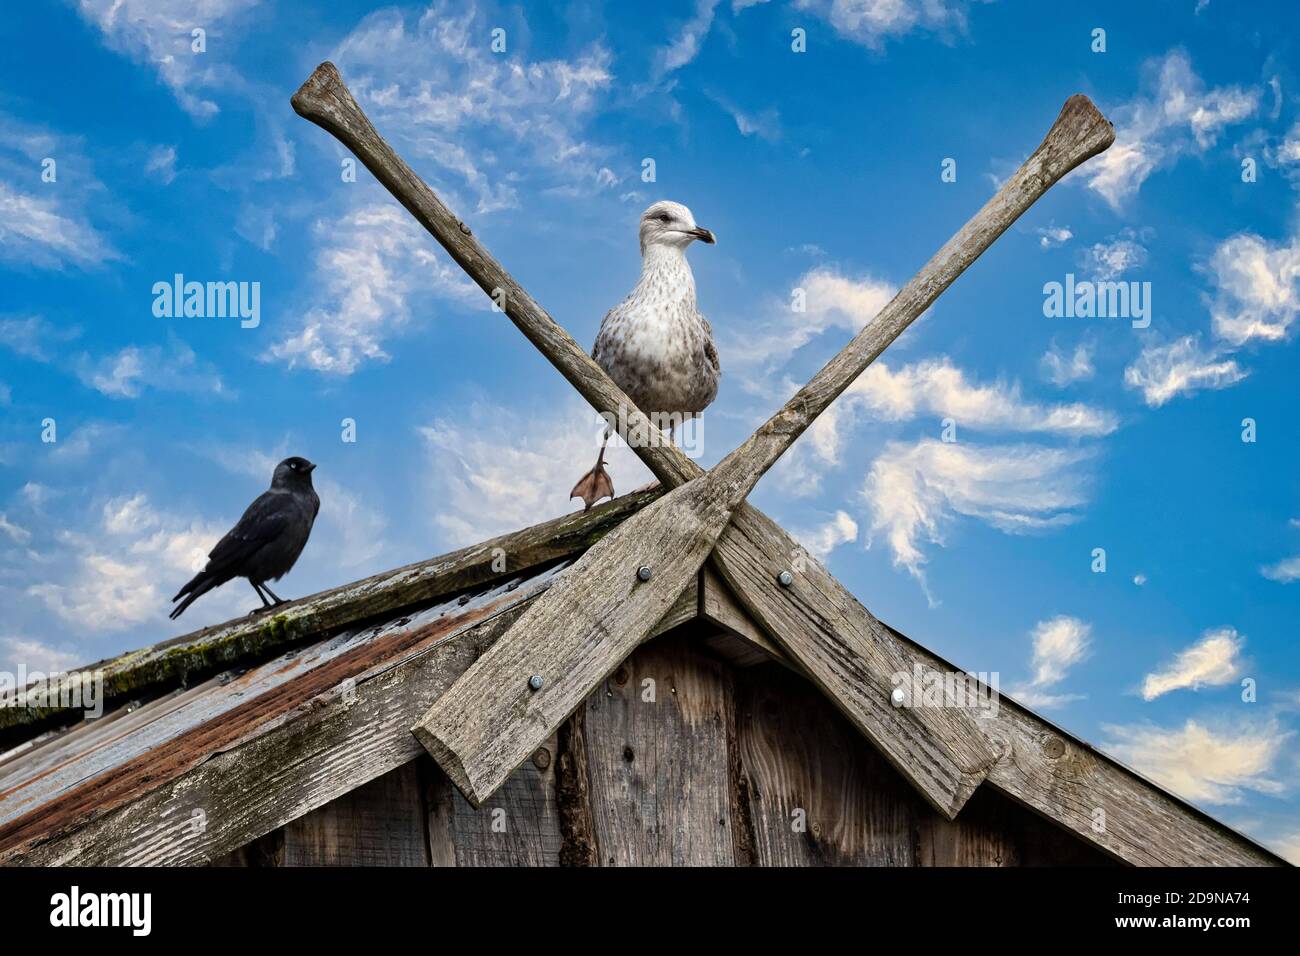 Seagull perched on roof between two wooden crossed oars against blue sky Stock Photo